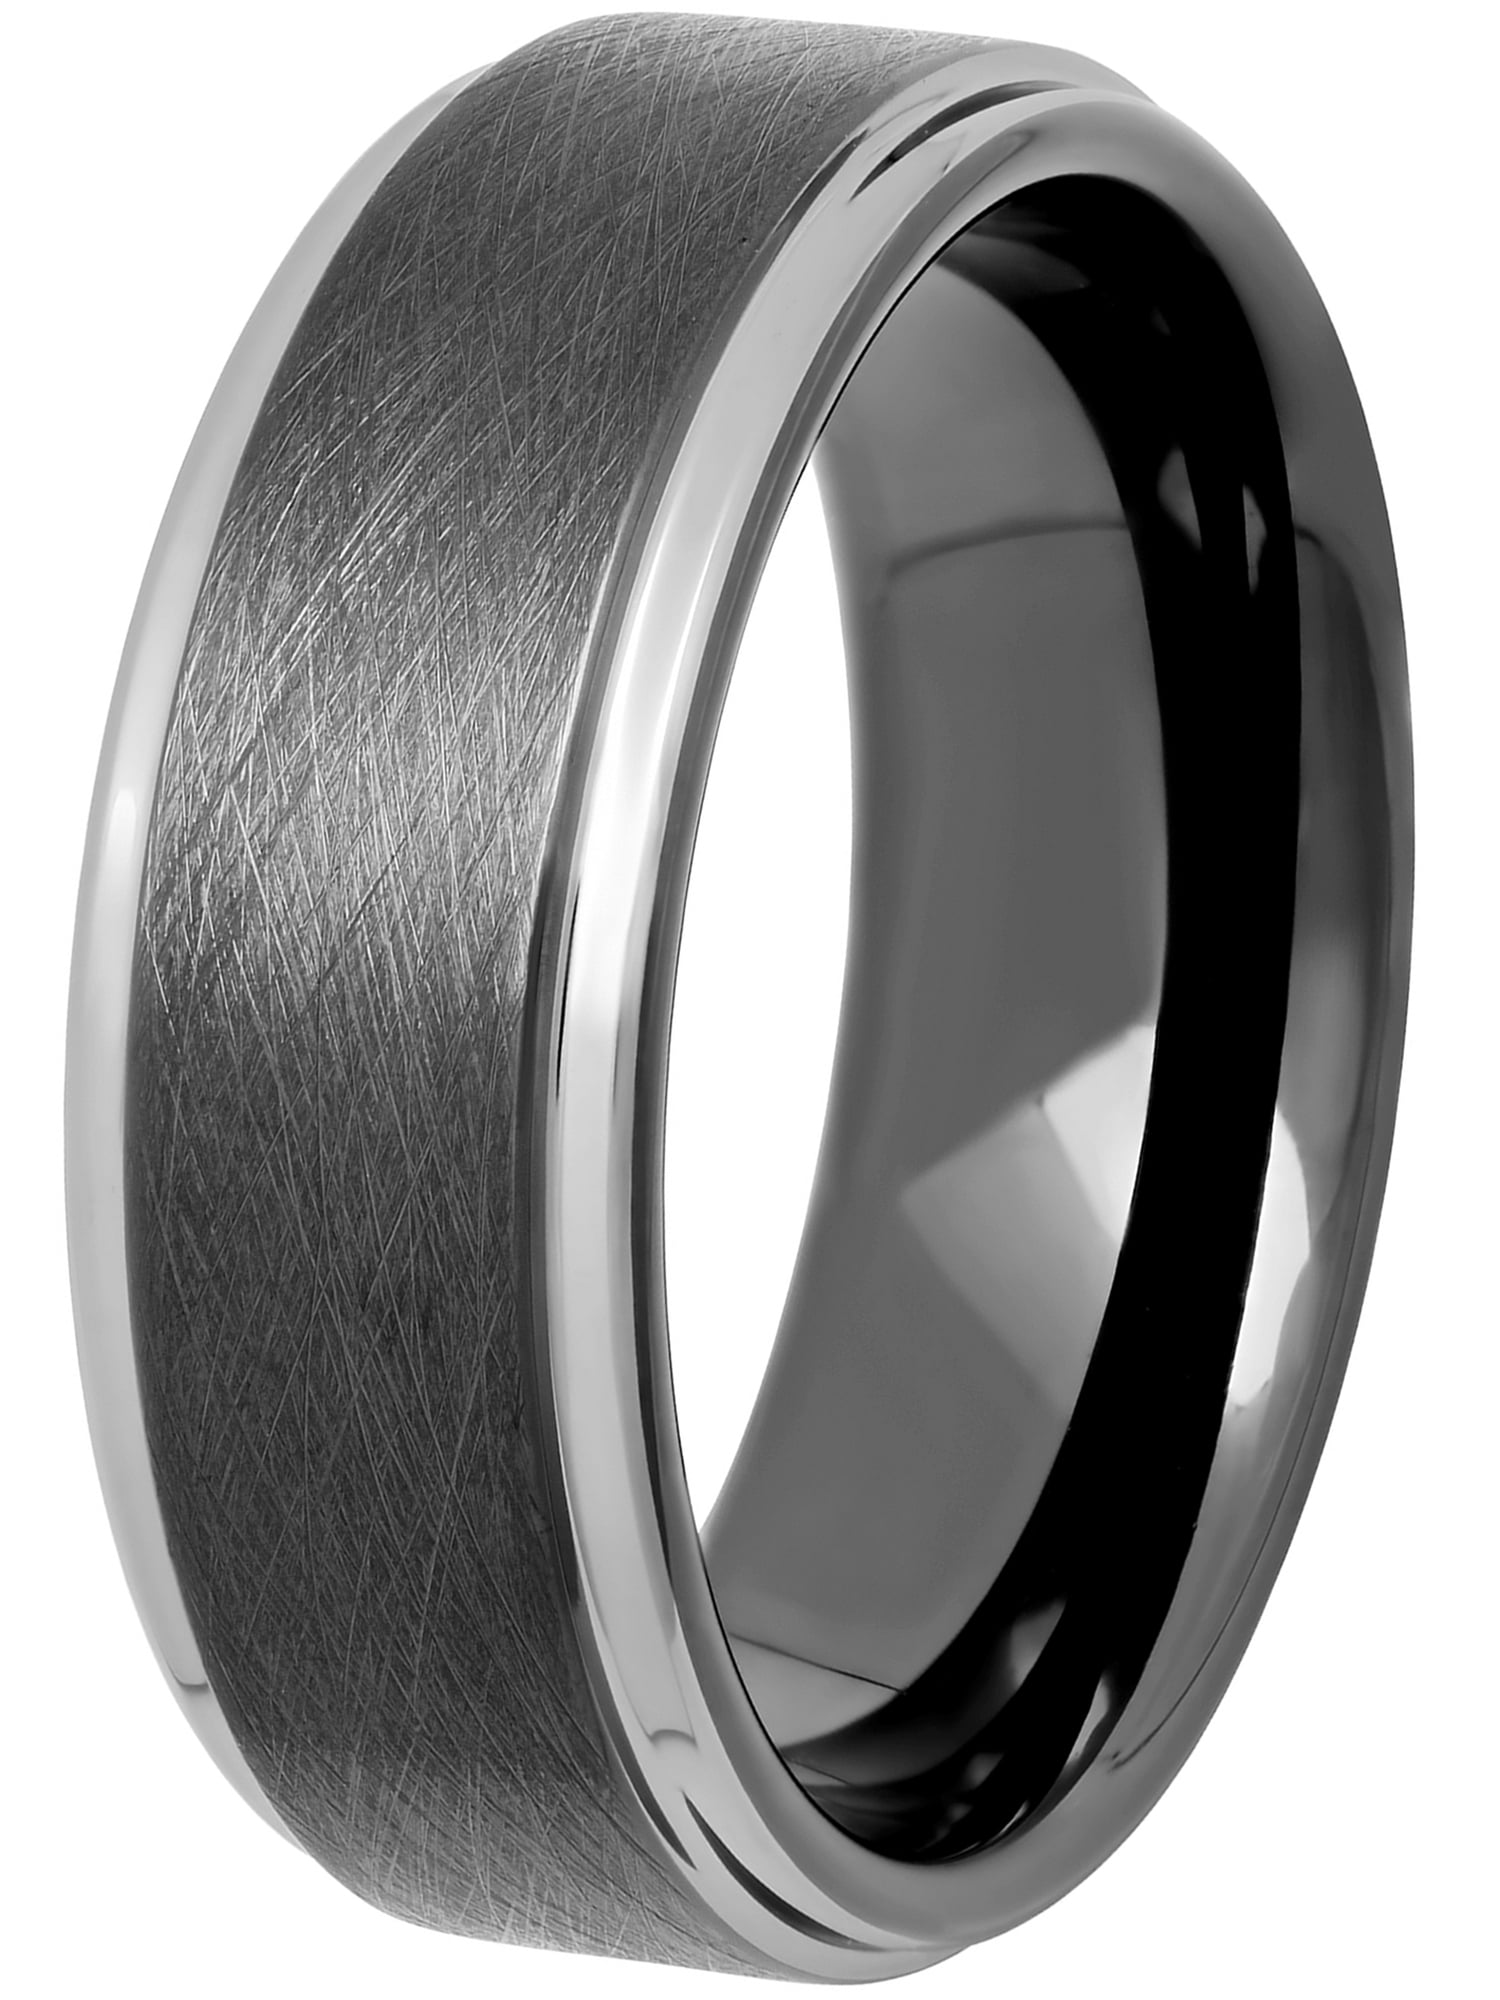 Black Tungsten Carbide Blessed Ring 8mm Wedding Band and Anniversary Ring for Men and Women Size 14.5 